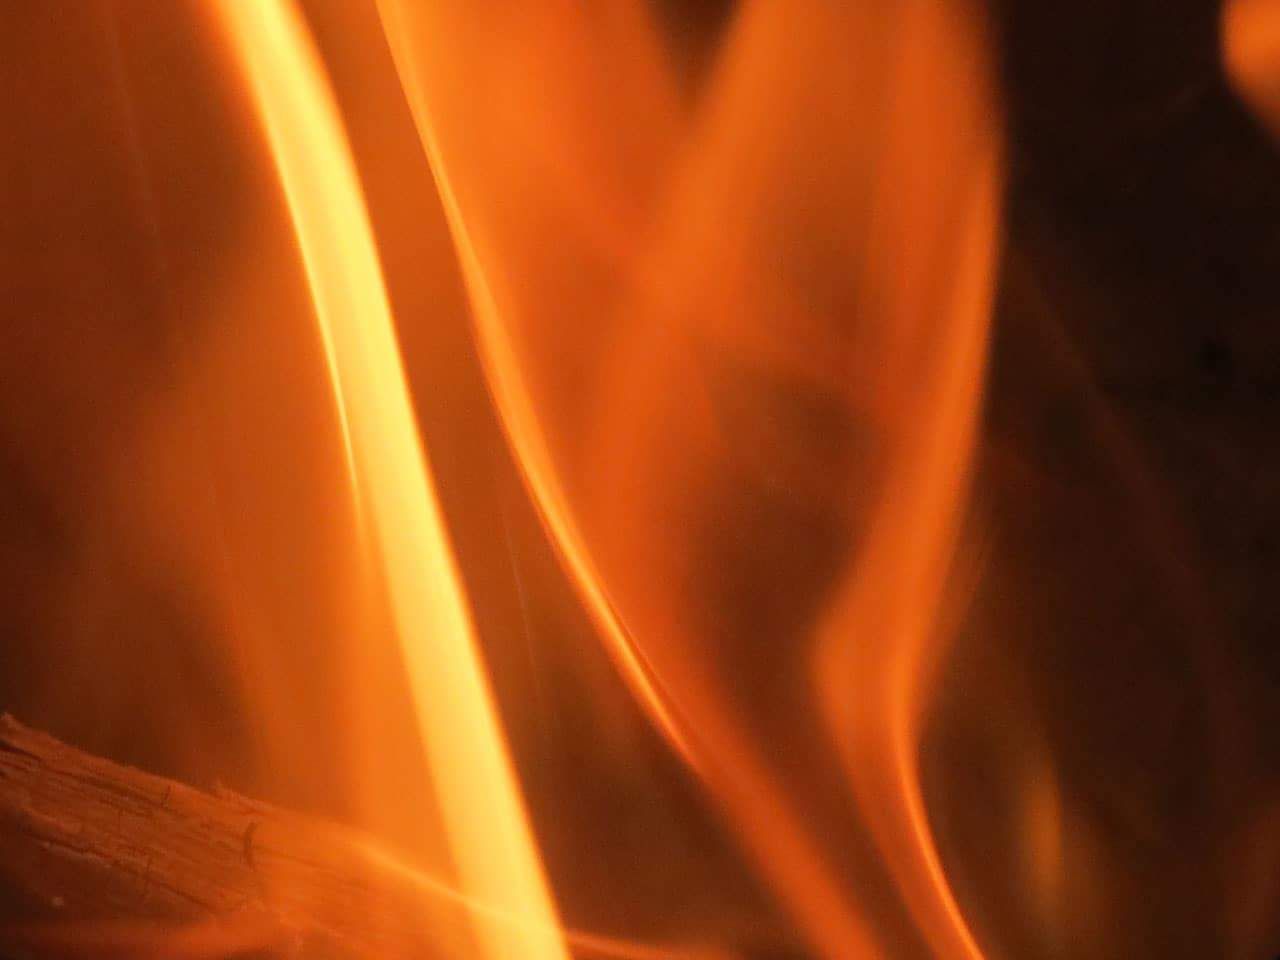 Flames from my cabin’s fireplace